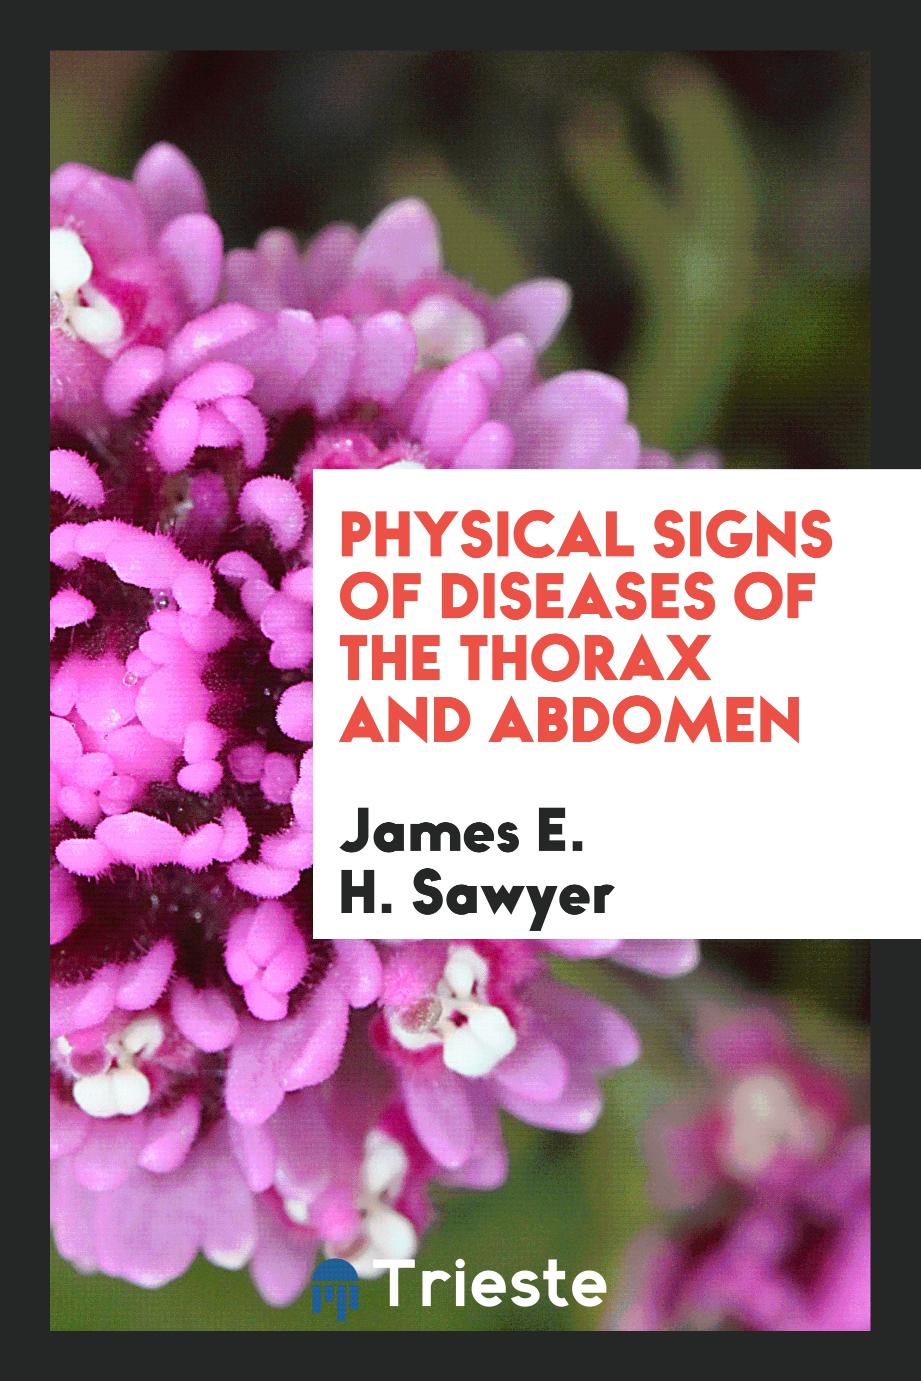 Physical Signs of Diseases of the Thorax and Abdomen